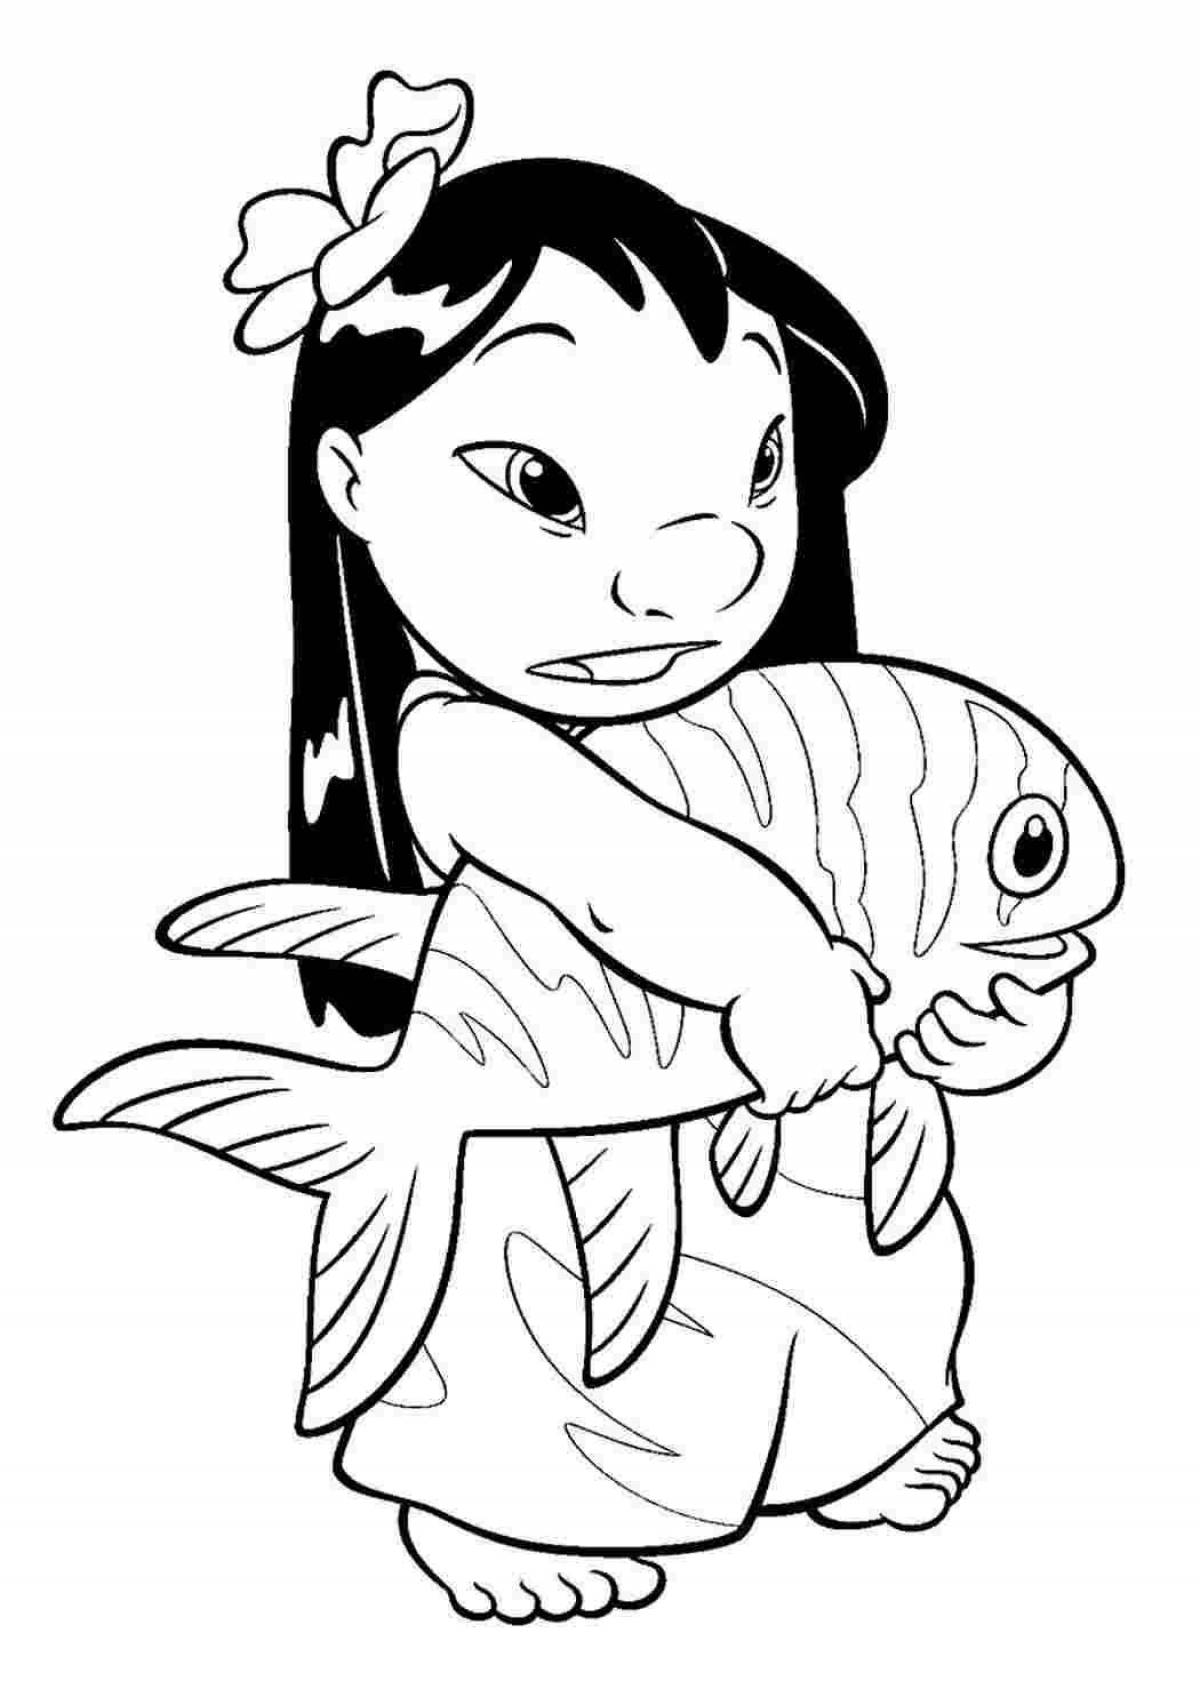 Lilo and stitch holiday coloring book for girls